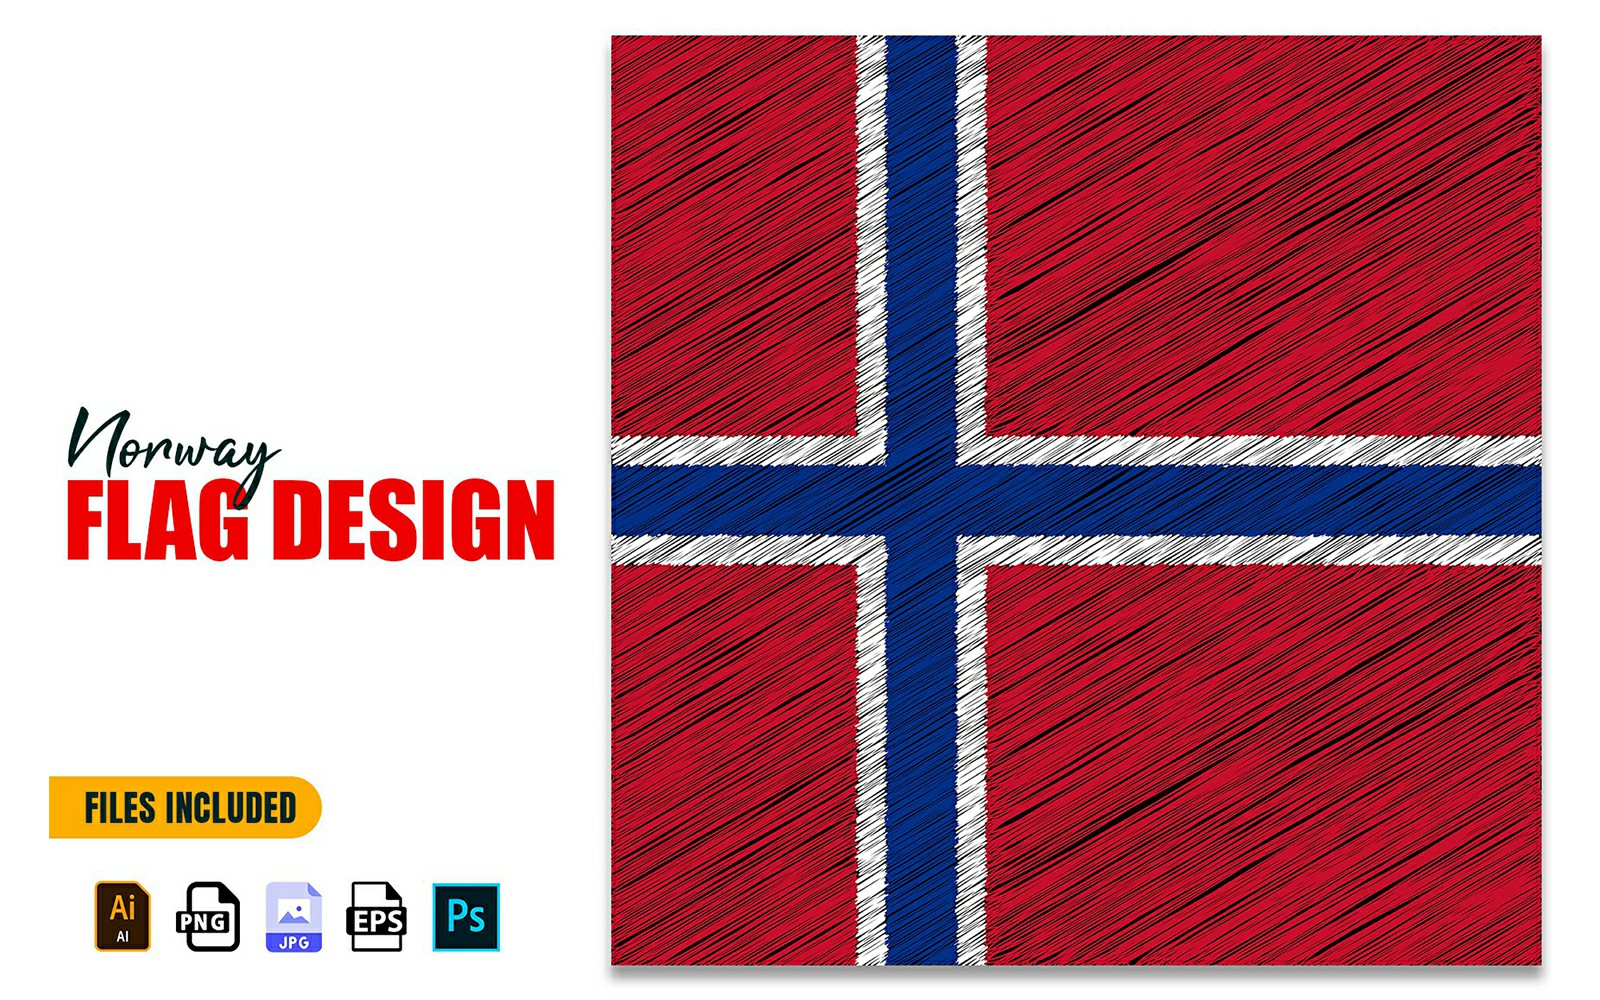 17 May Norway National Day Flag Design illustration